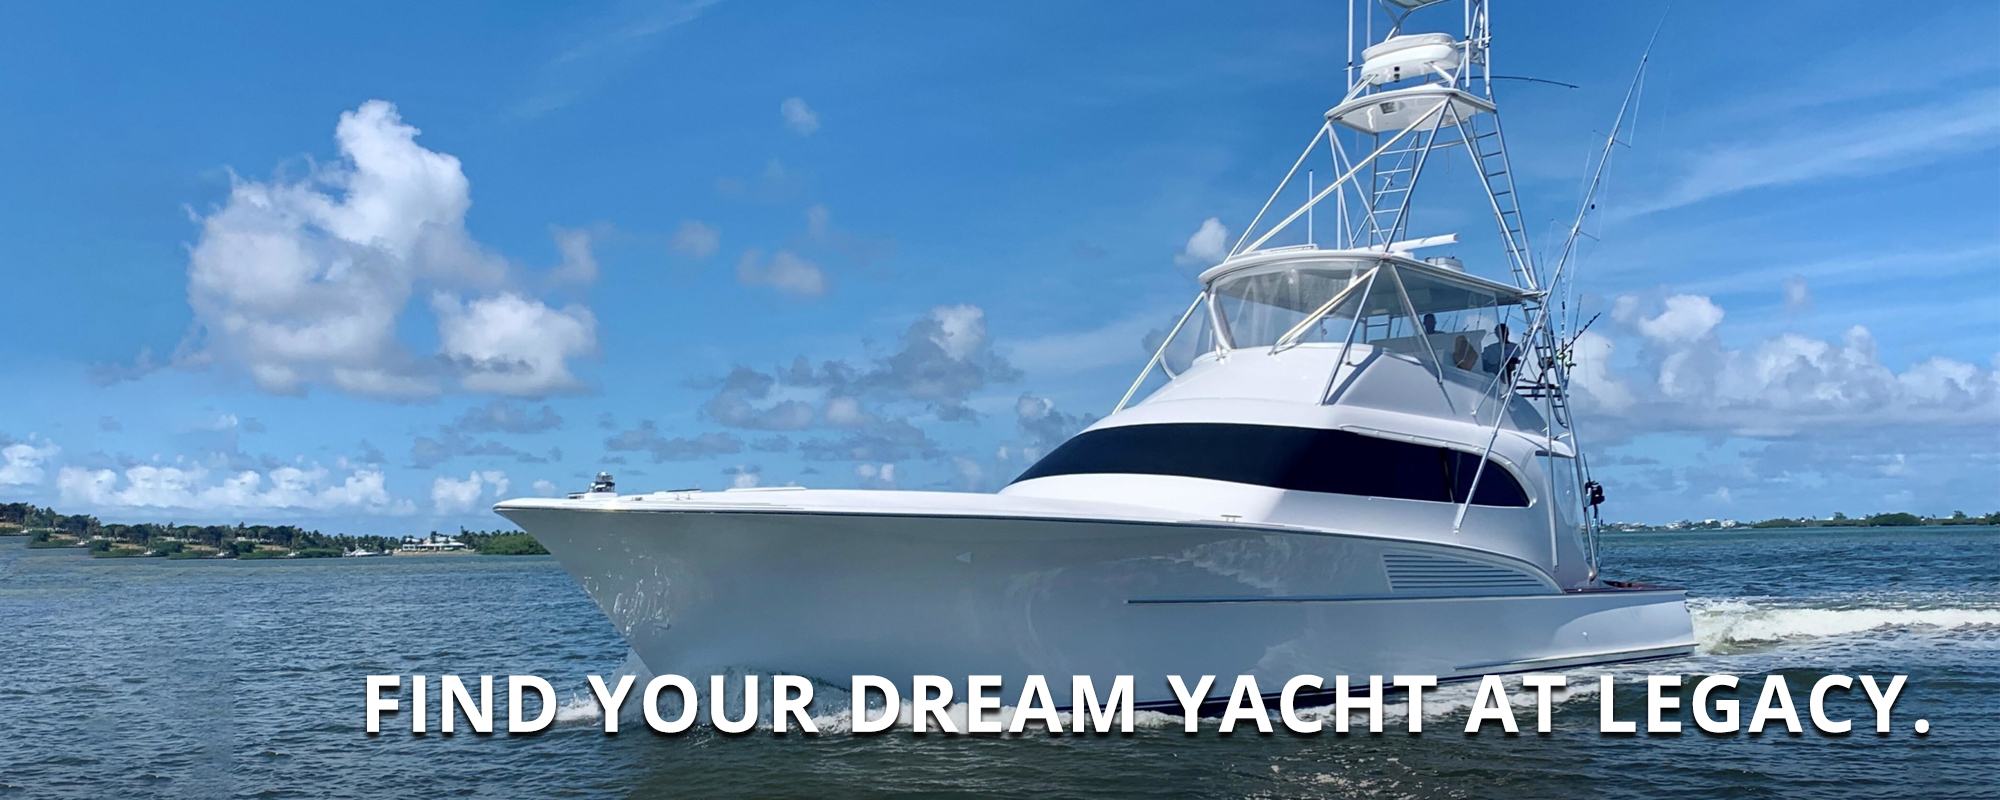 Find your dream yacht at Legacy